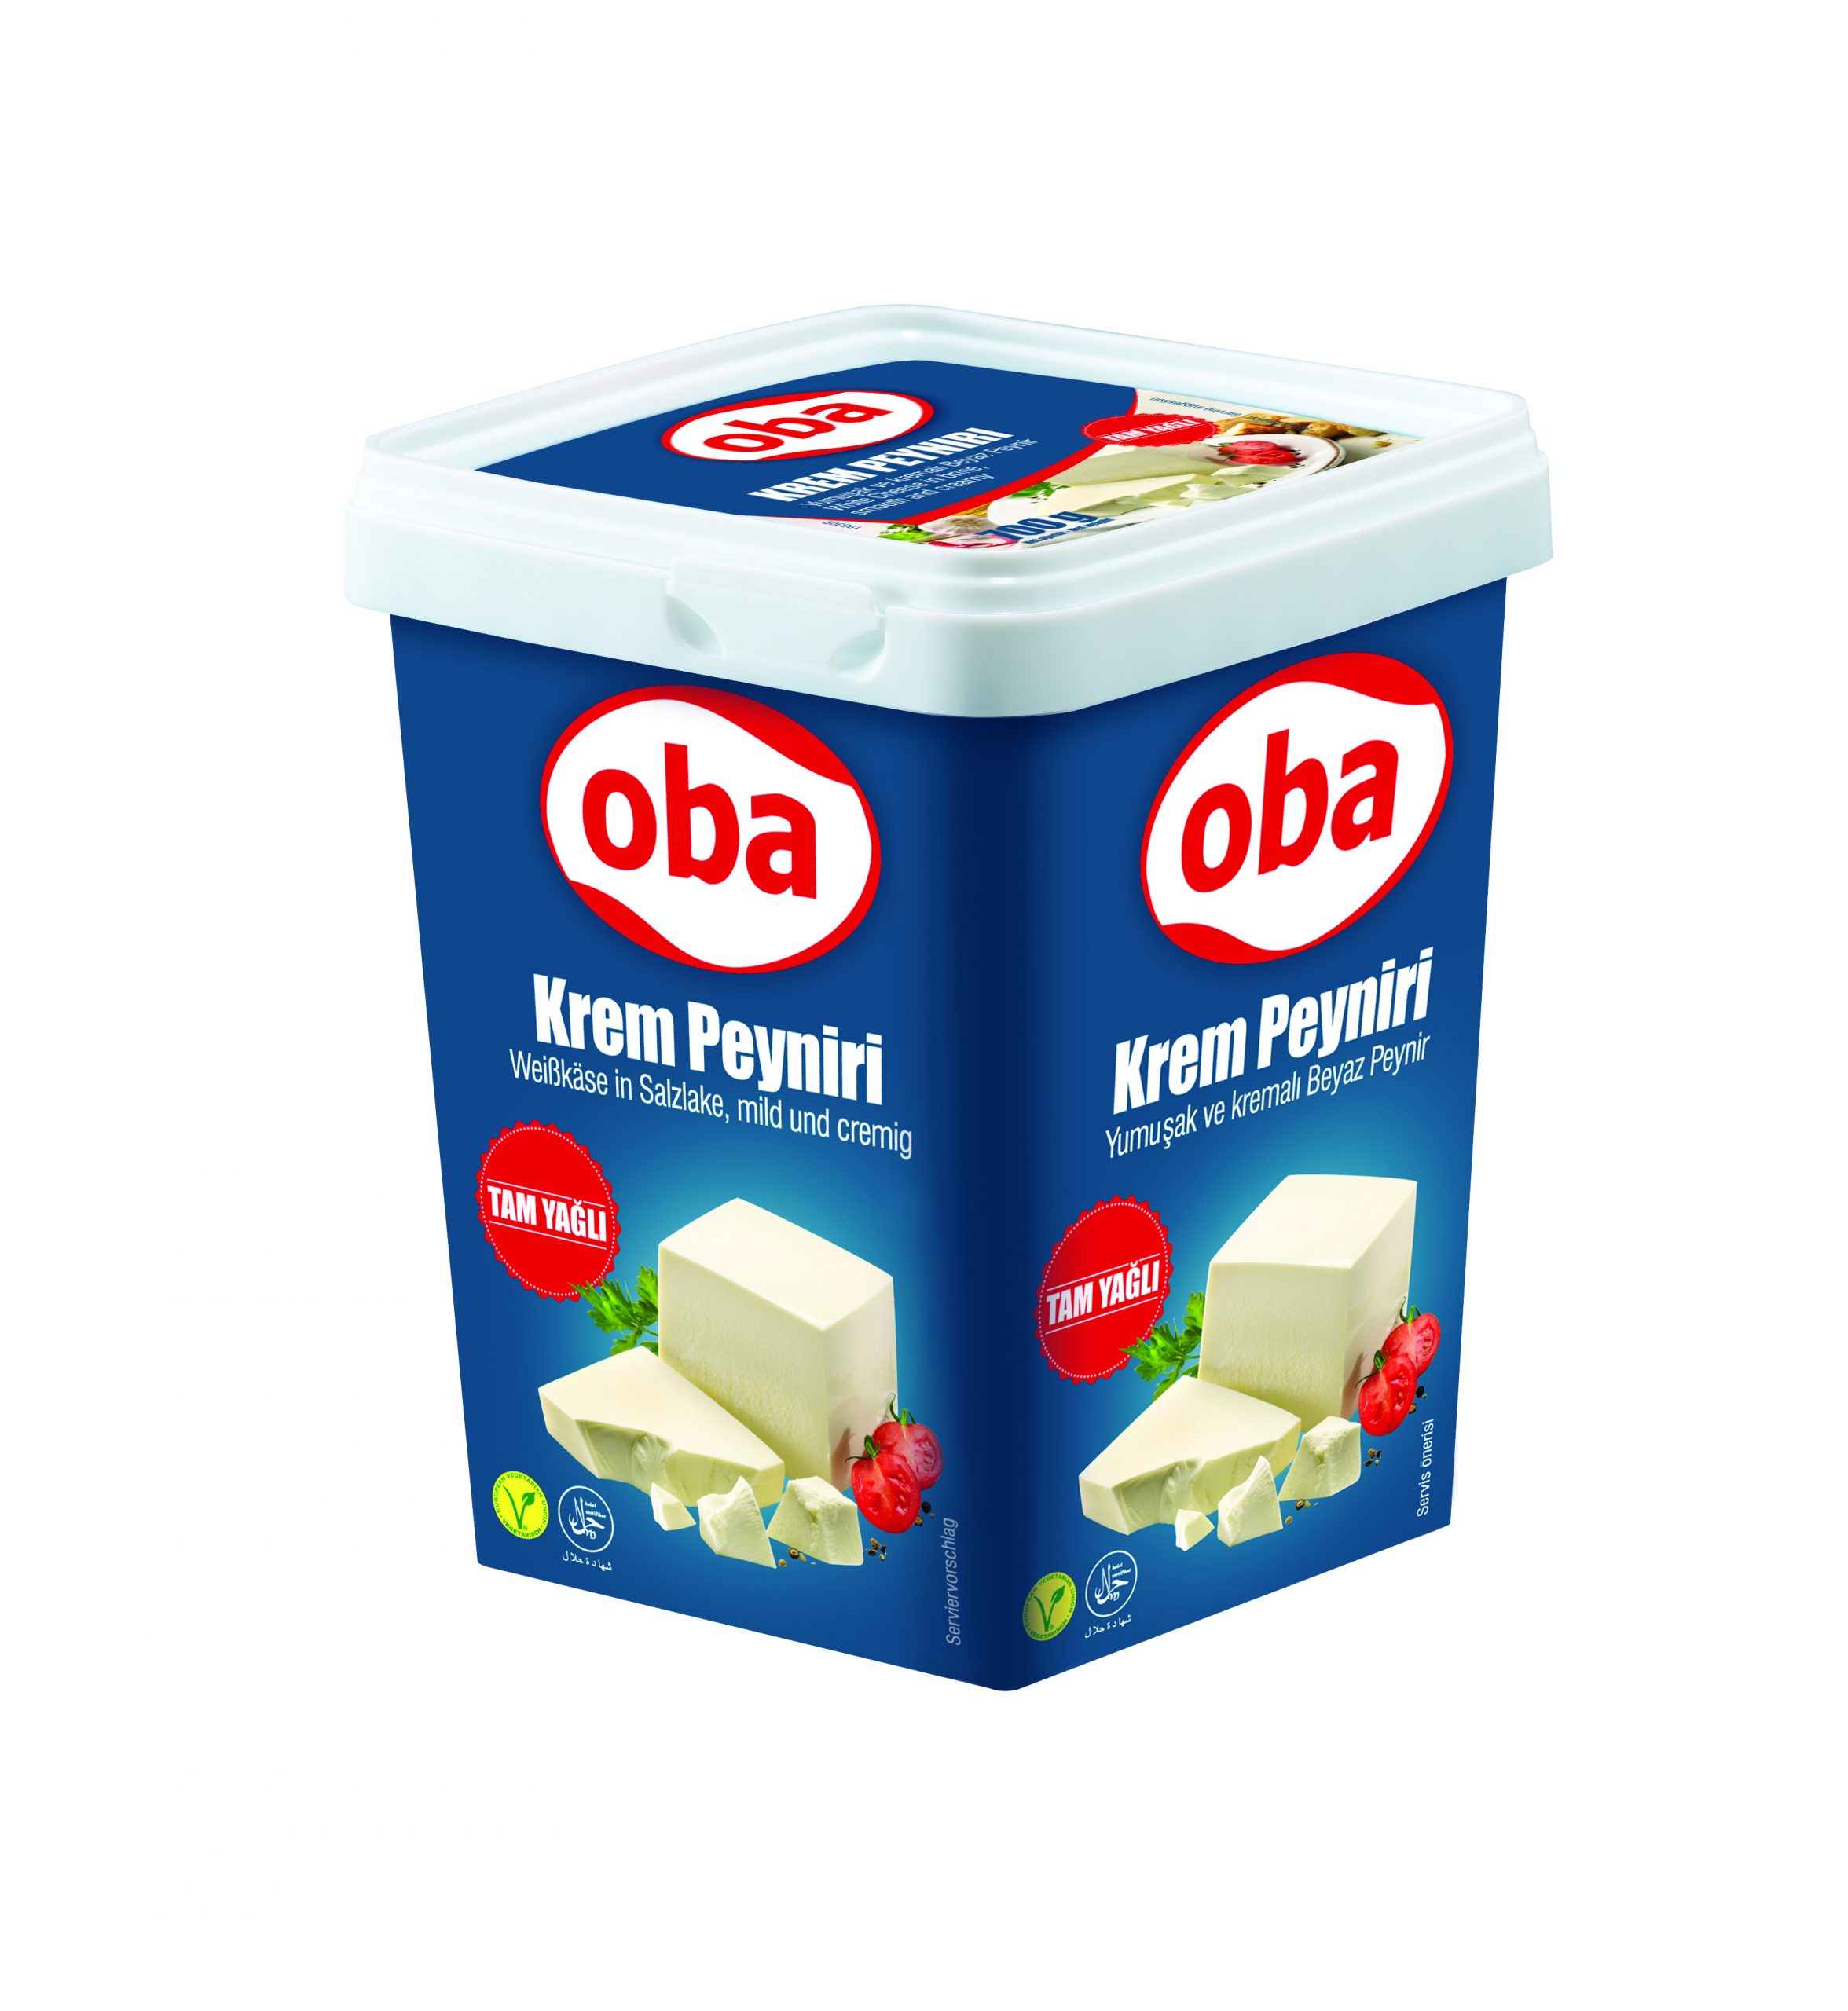 oba - cow cheese 400g